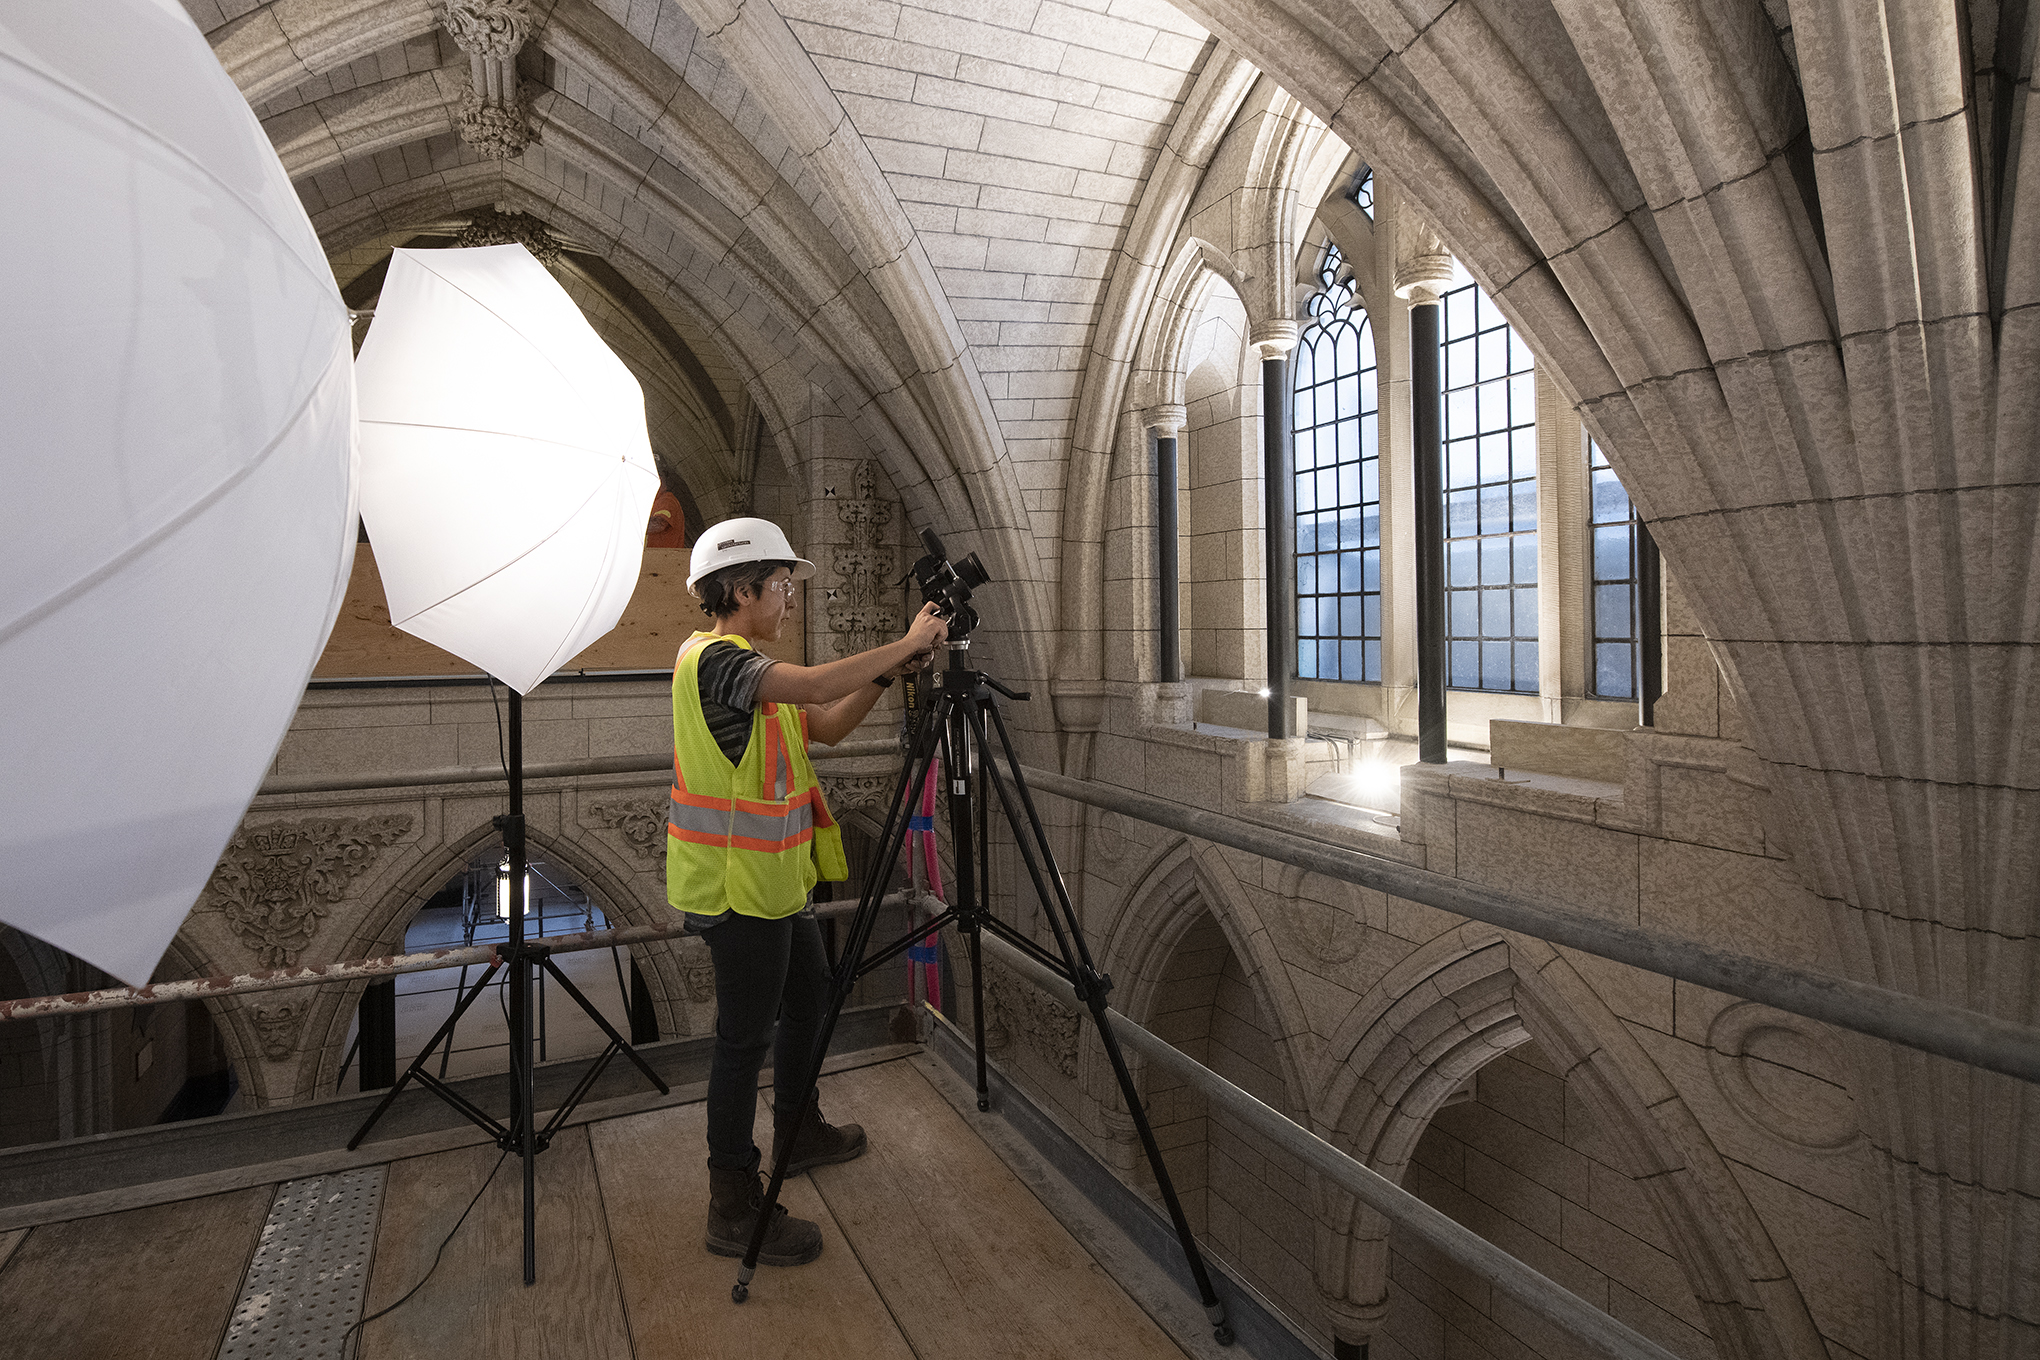 A worker is standing on scaffolding in an ornate room and taking photos of a carved vaulted stone ceiling.